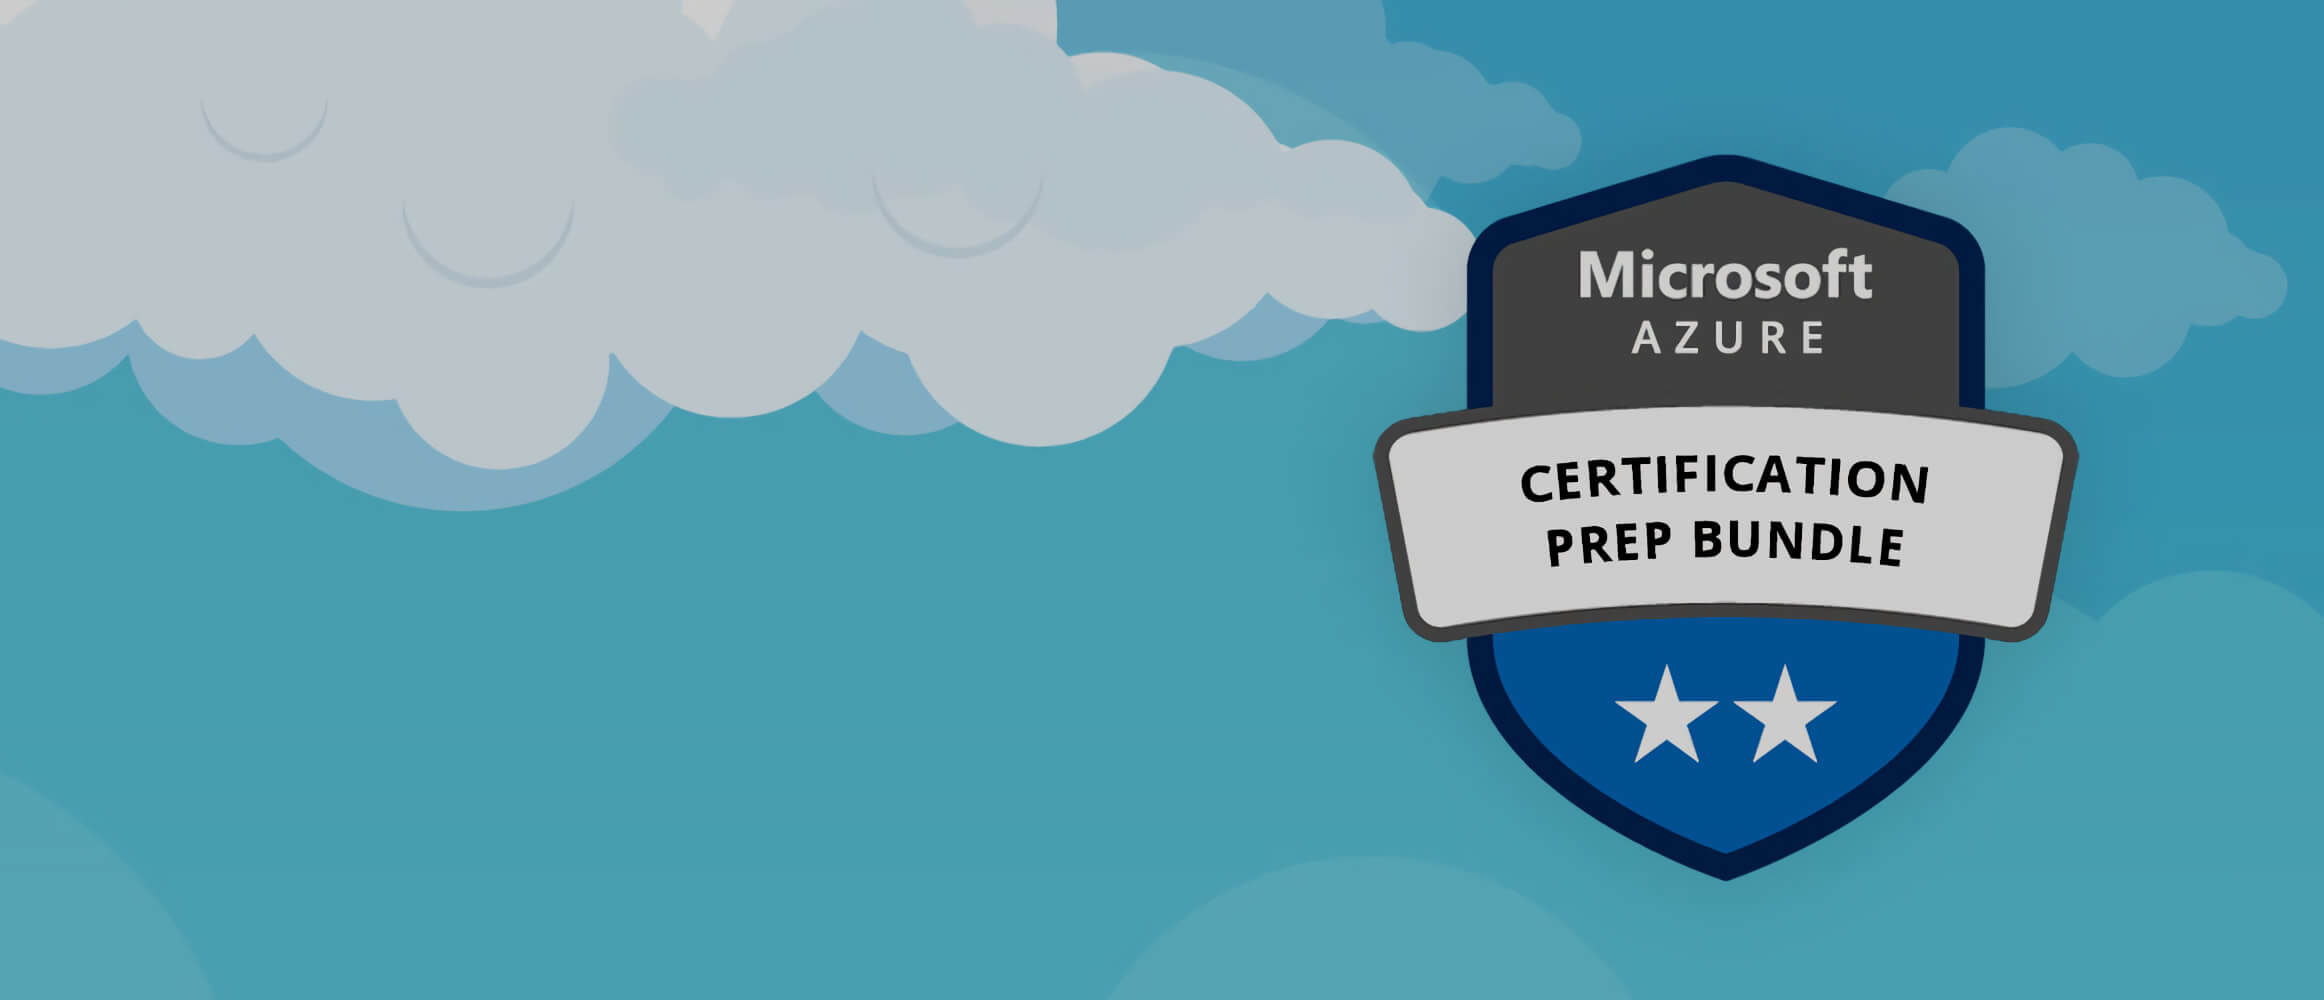 Master Microsoft Azure cloud with this certification prep bundle